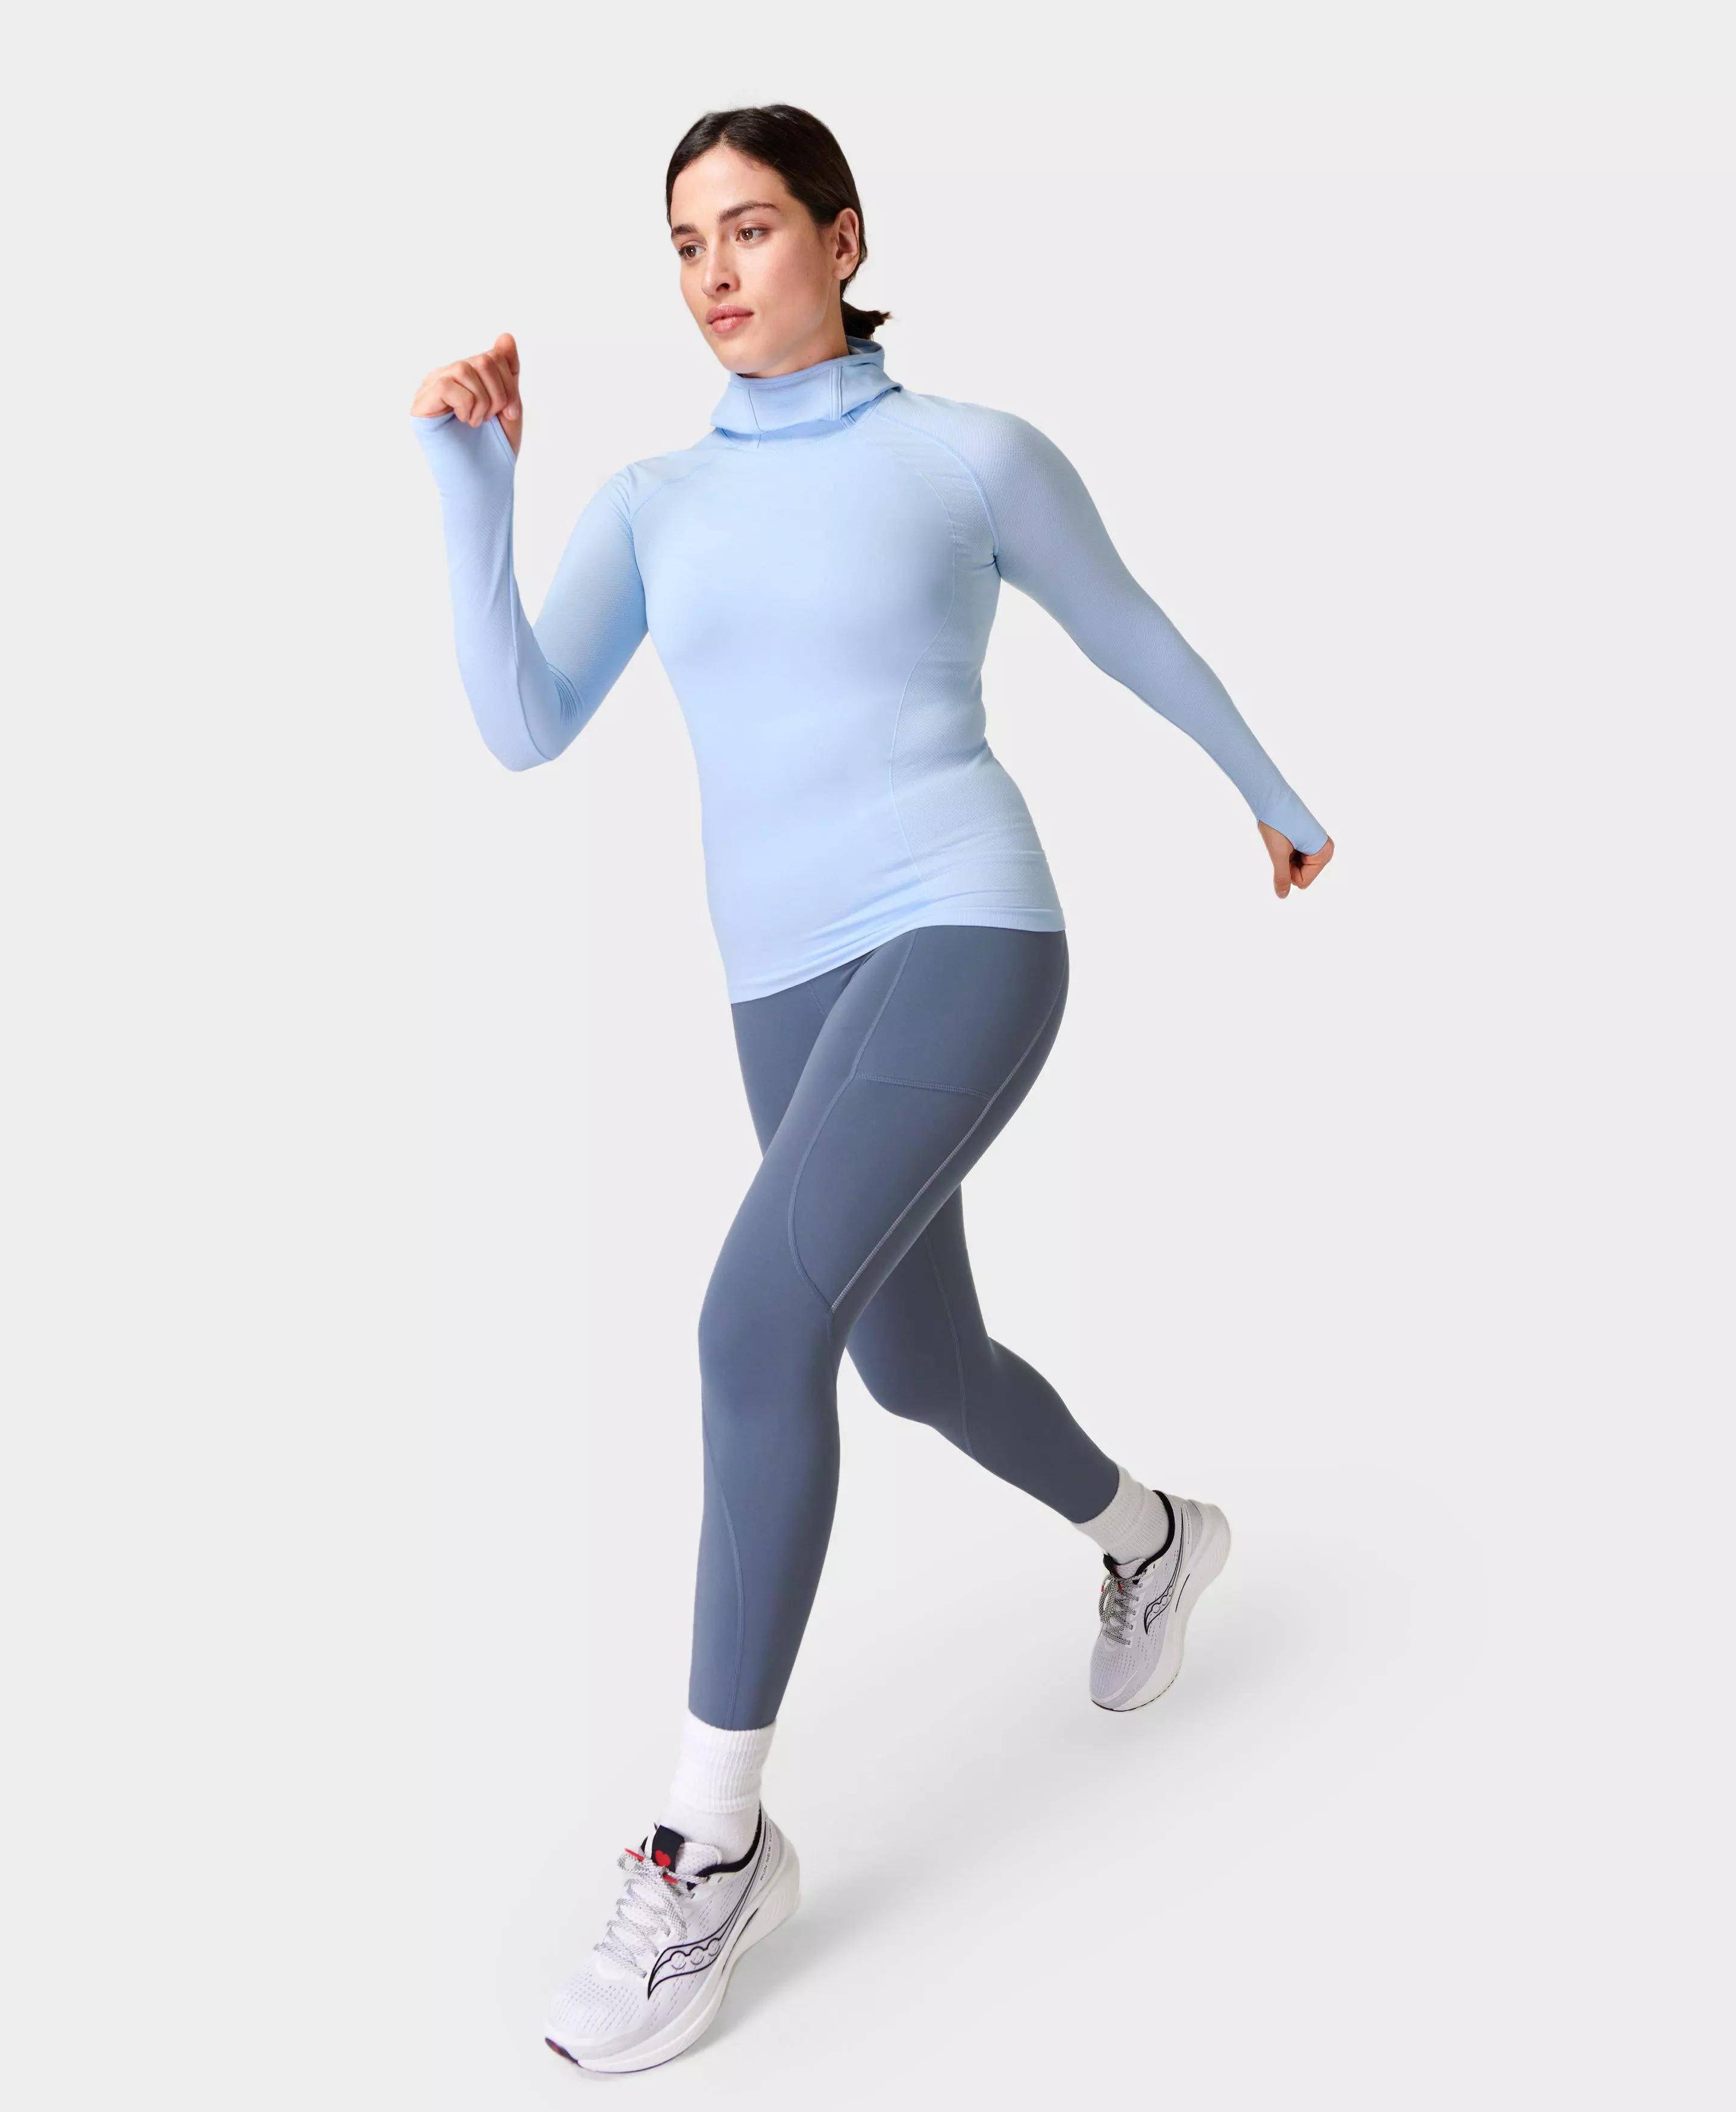 Pockets For Women - Therma Boost 2.0 Running Leggings